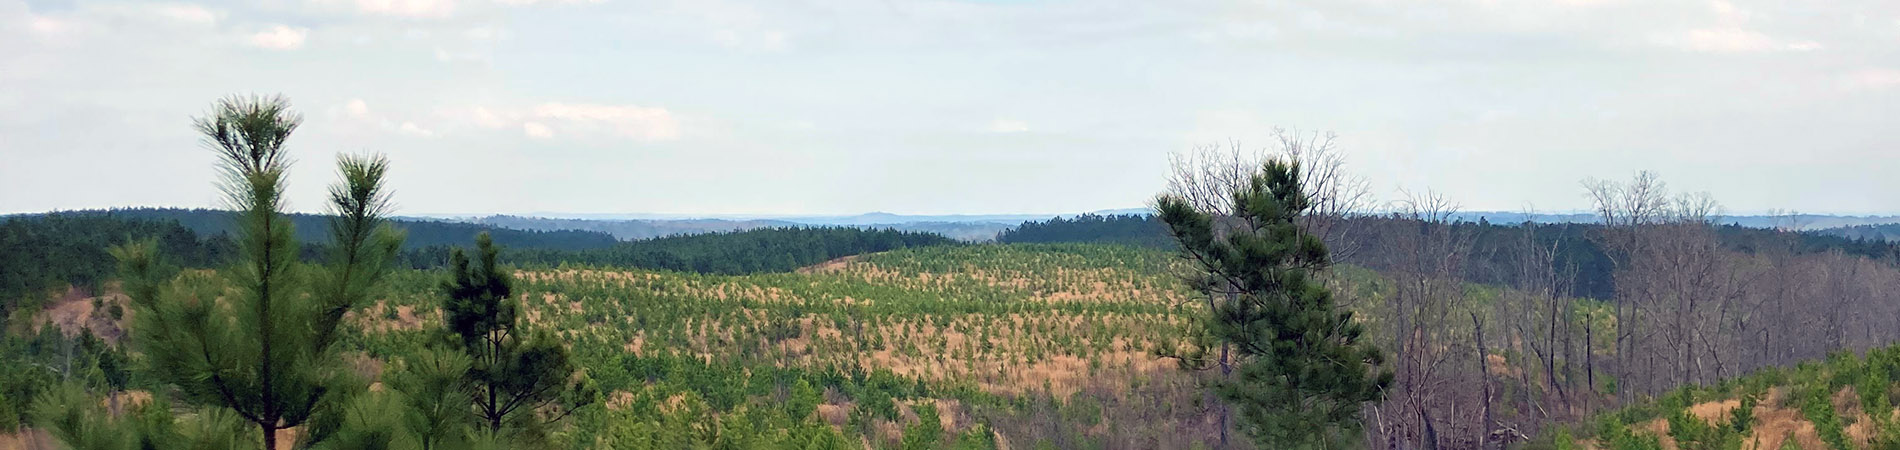 Hills and pine trees